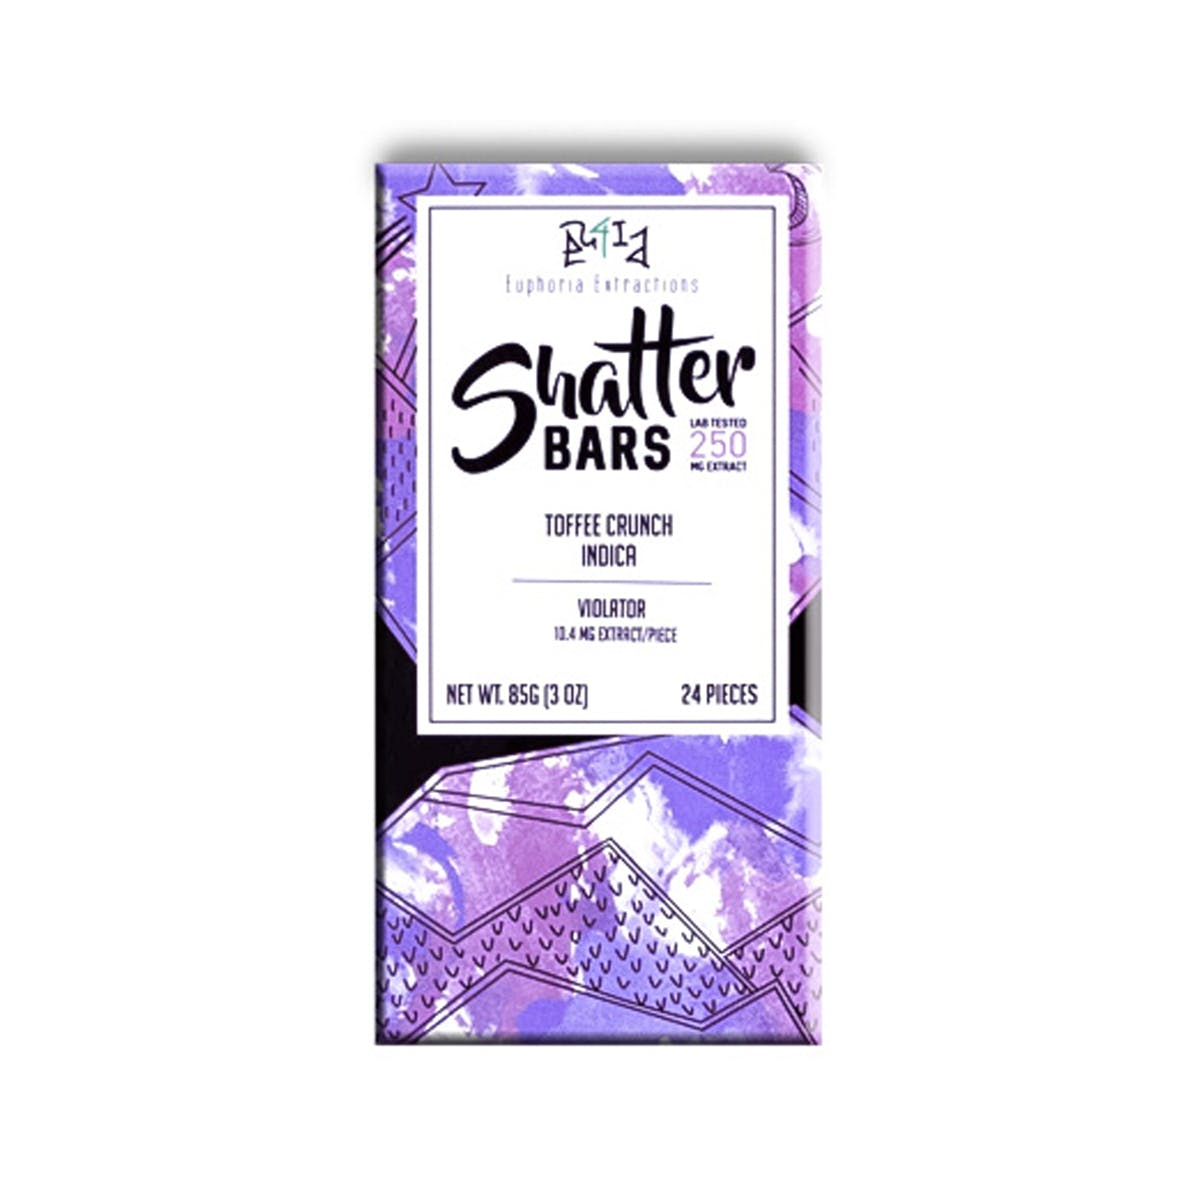 Toffee Crunch Indica 250mg Shatter Bar